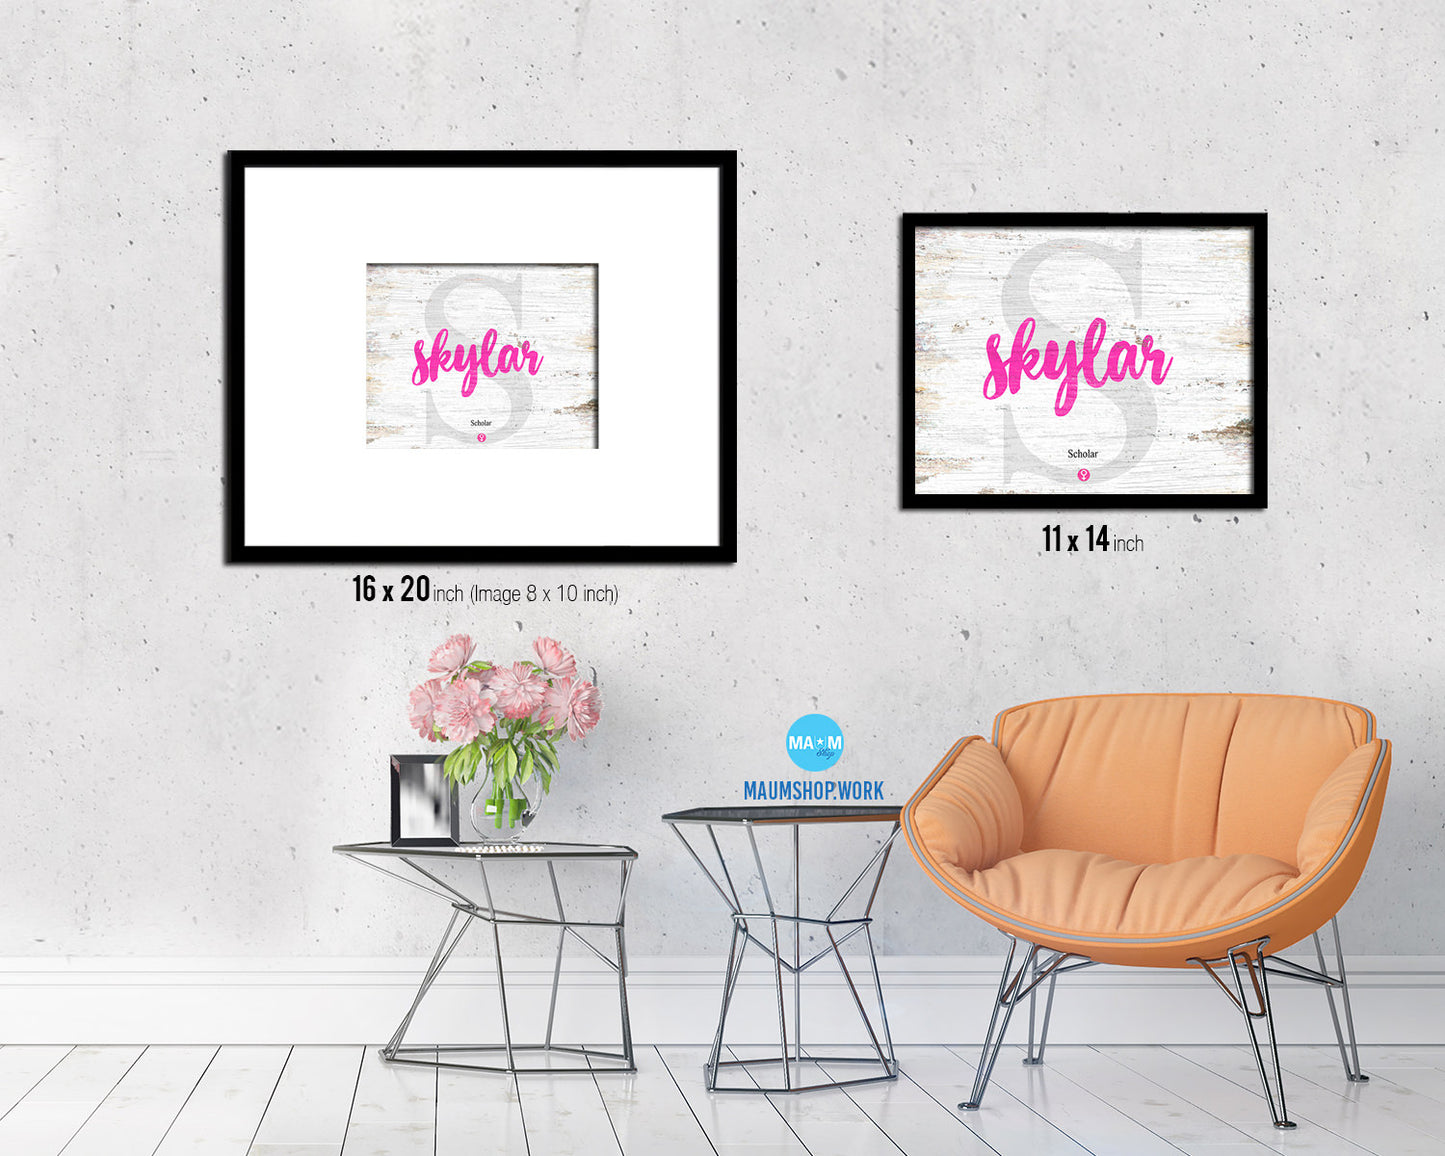 Scarlett Personalized Biblical Name Plate Art Framed Print Kids Baby Room Wall Decor Gifts